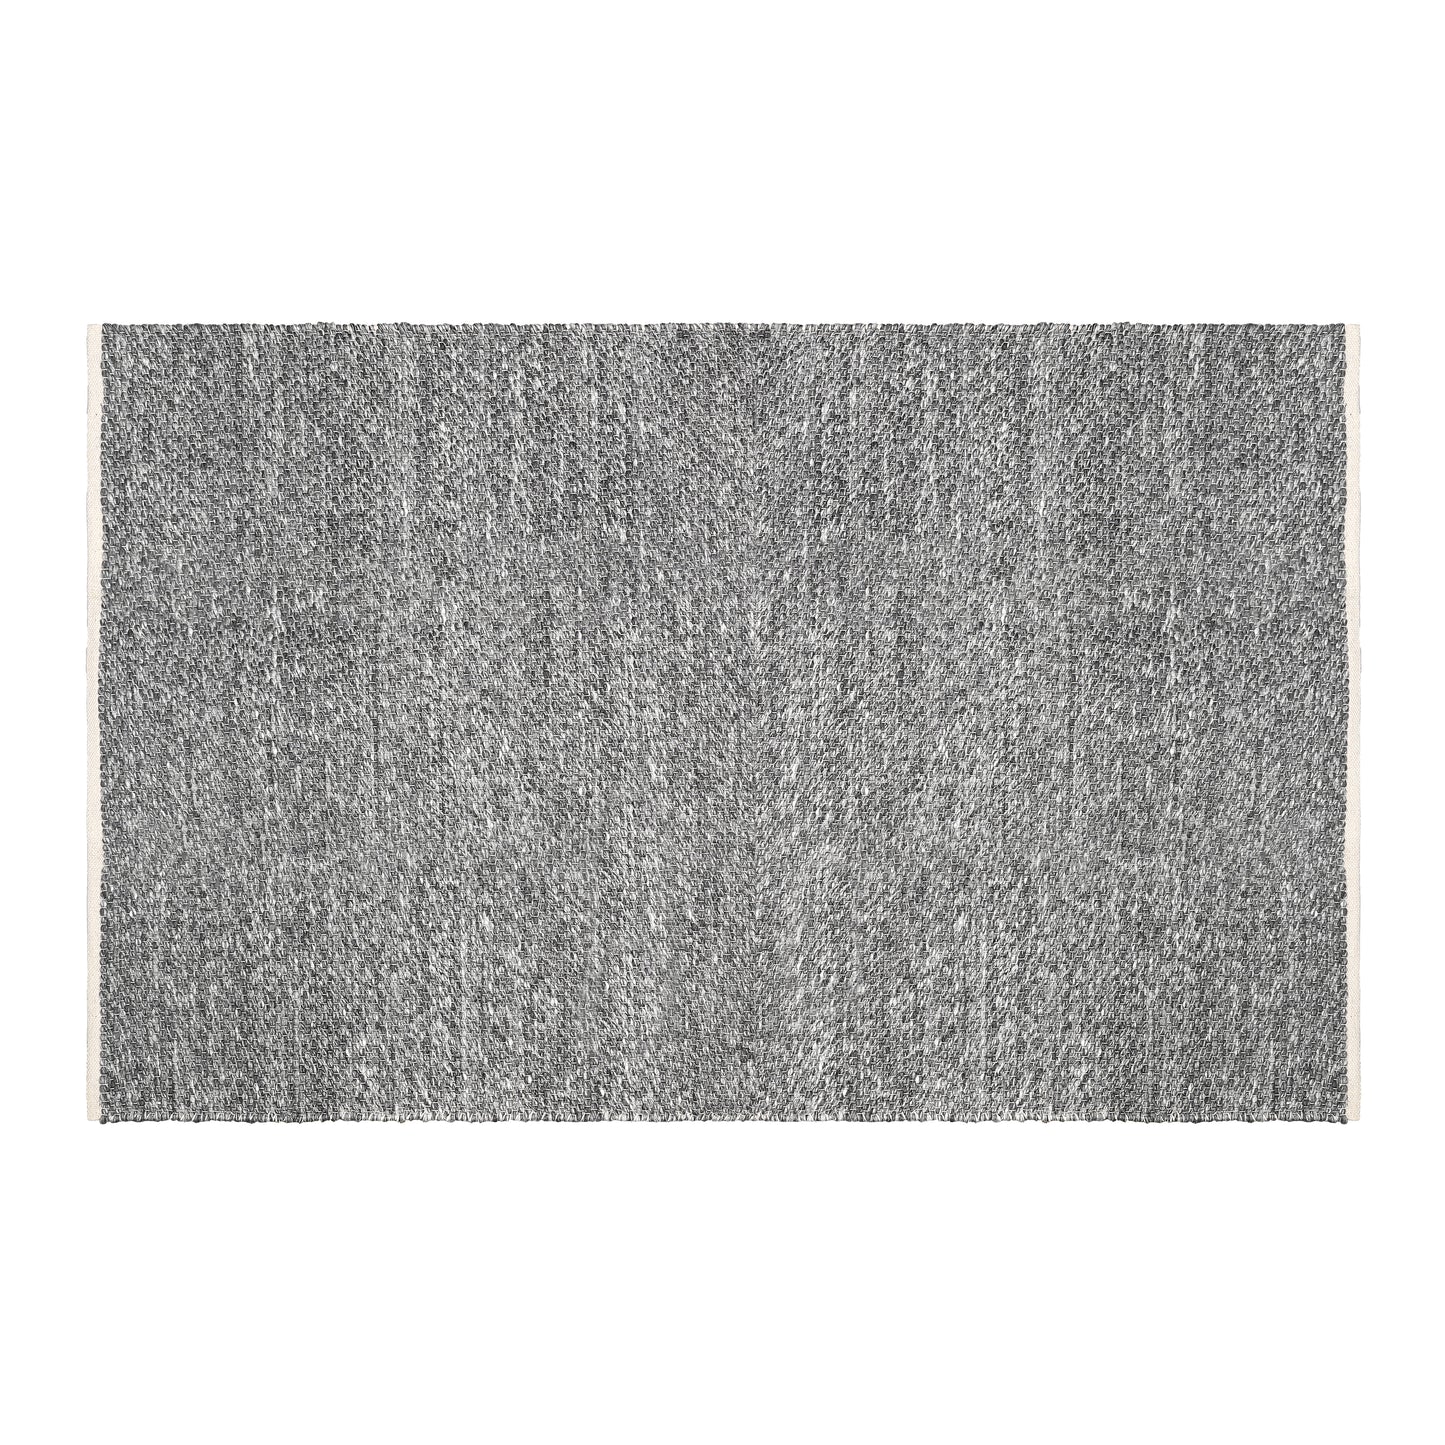 Hand Woven Wool Area Rug Woven Solid Gray 1240